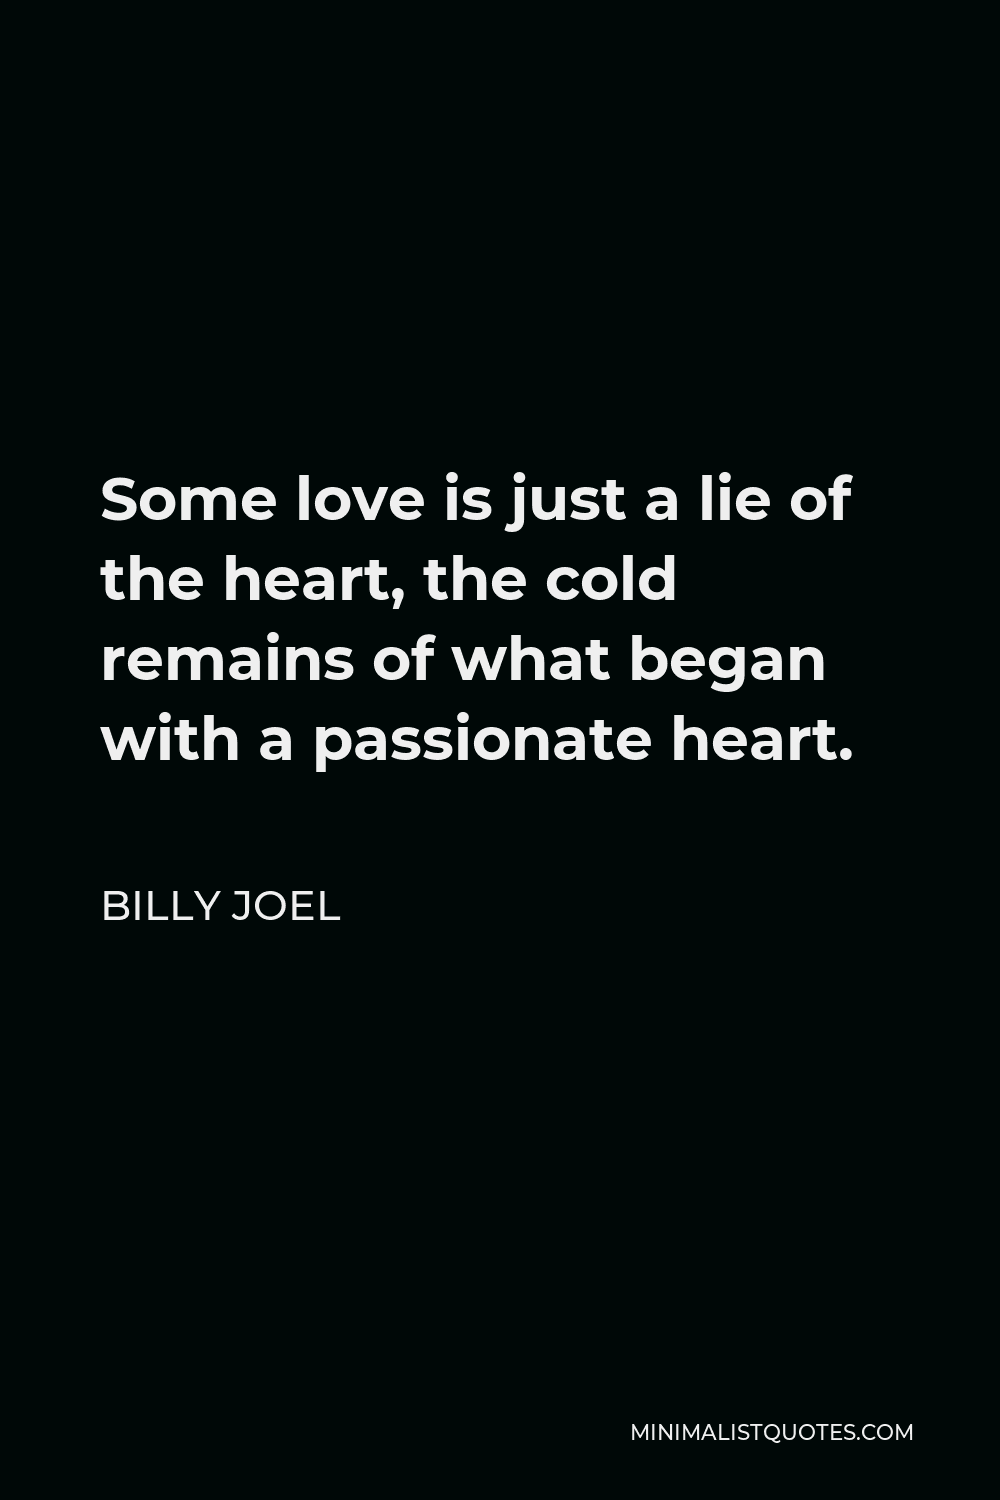 Billy Joel Quote - Some love is just a lie of the heart, the cold remains of what began with a passionate heart.